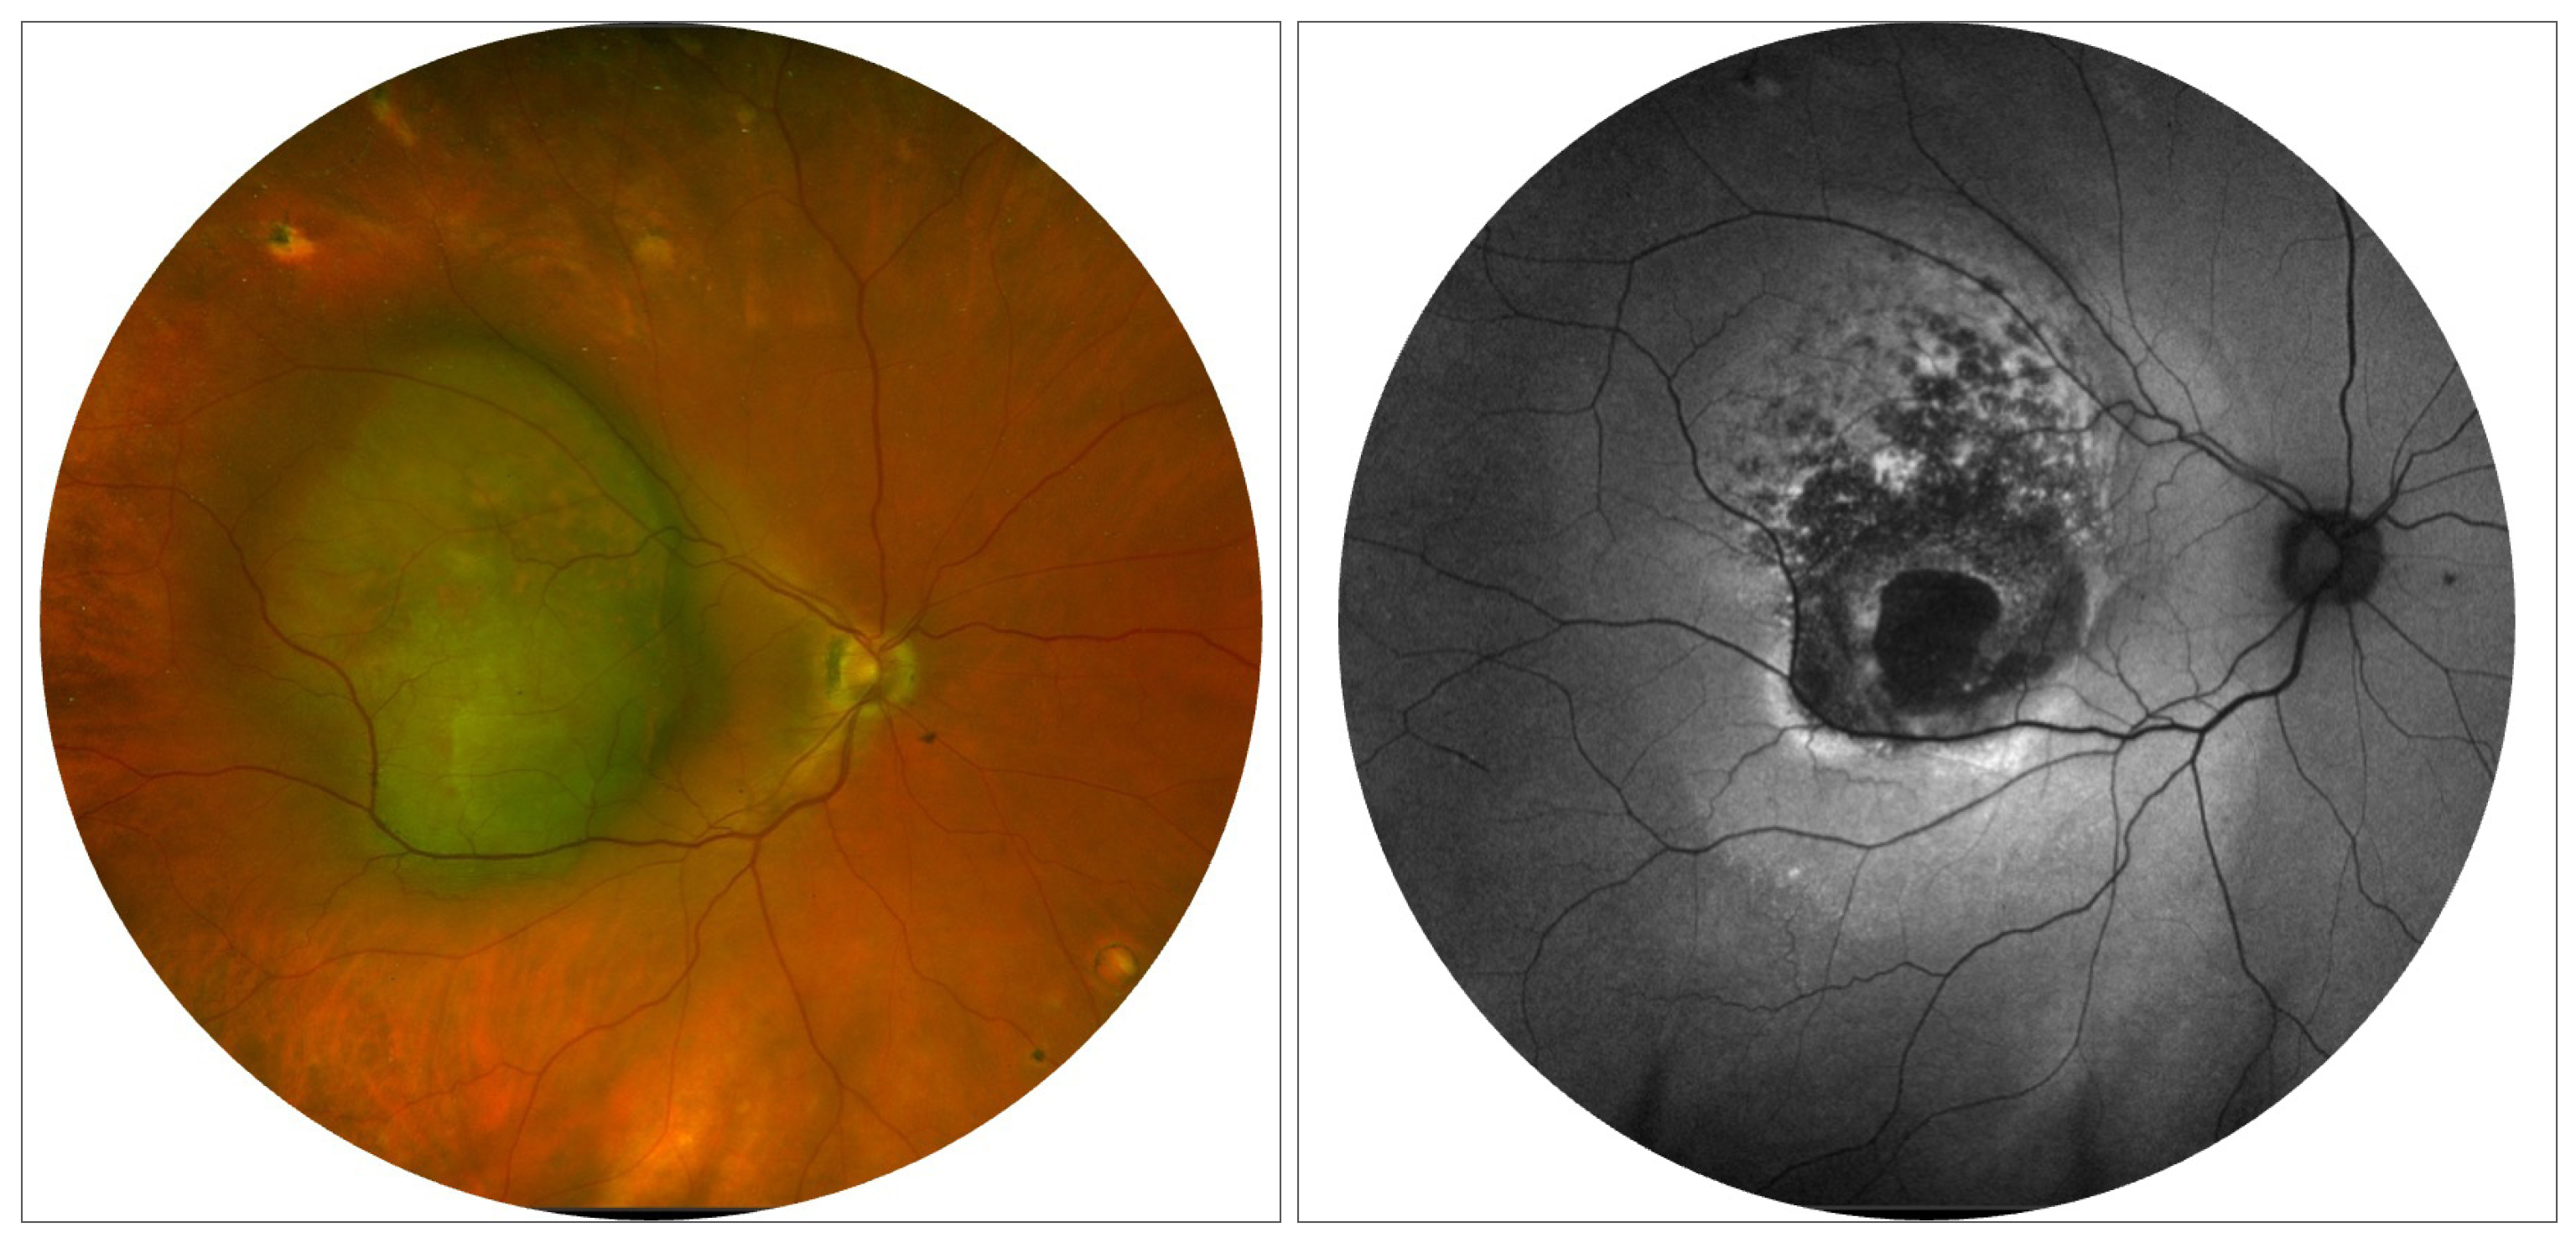 A recent study proposes that metastases of uveal melanoma could have spread from small tumors during the gap between diagnosis and treatment and remained dormant for a decade before manifesting clinically.